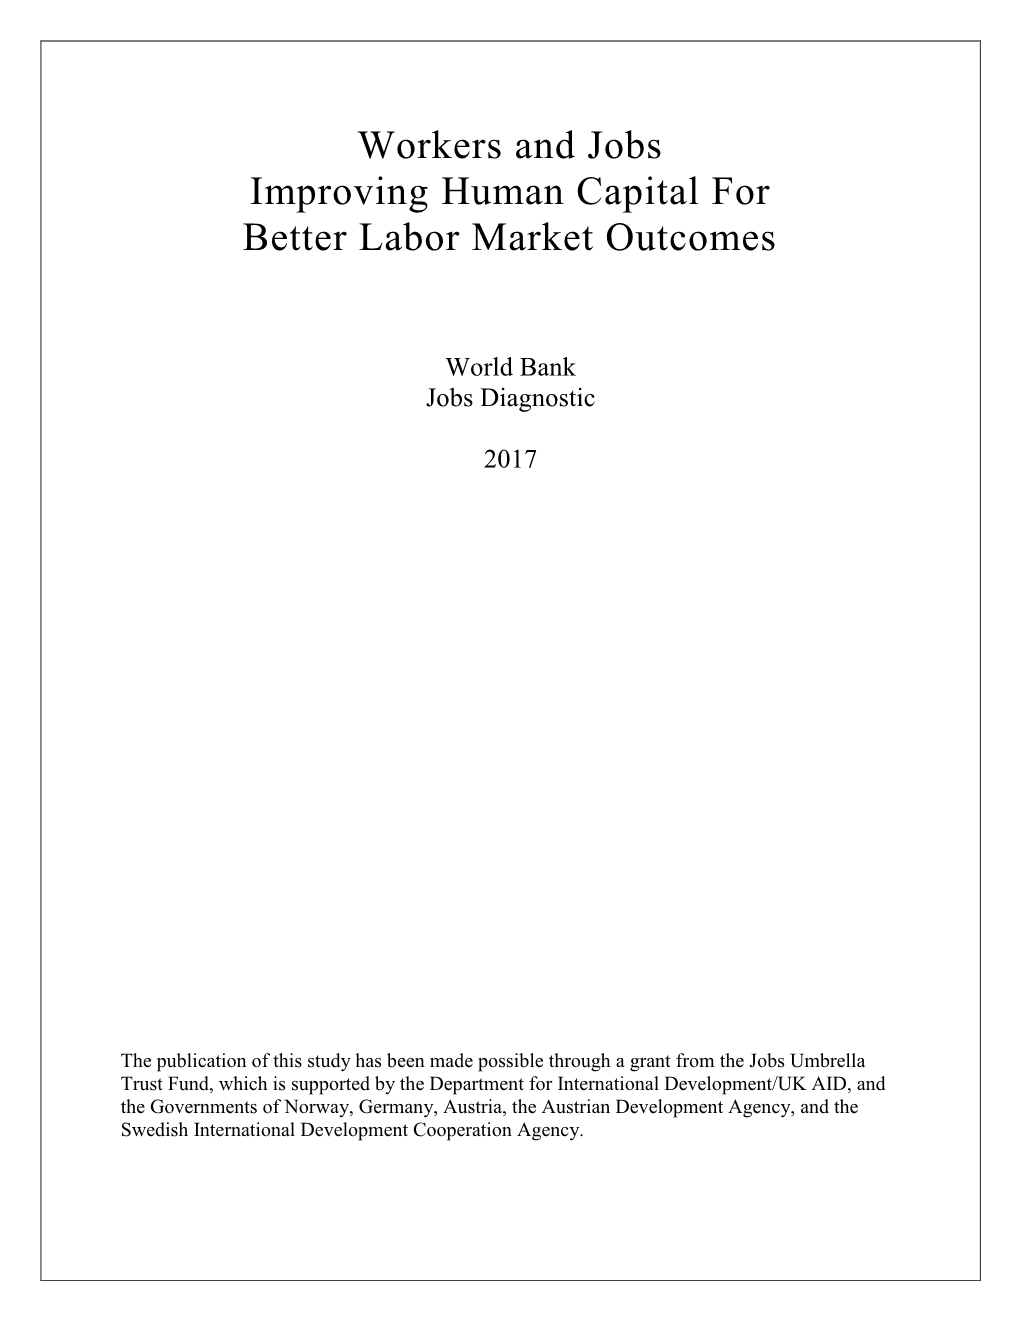 The Jobs Agenda in Burkina Faso: Workers and Jobs - Improving Human Capital for Better Labor Market Outcomes.” World Bank, Washington, DC